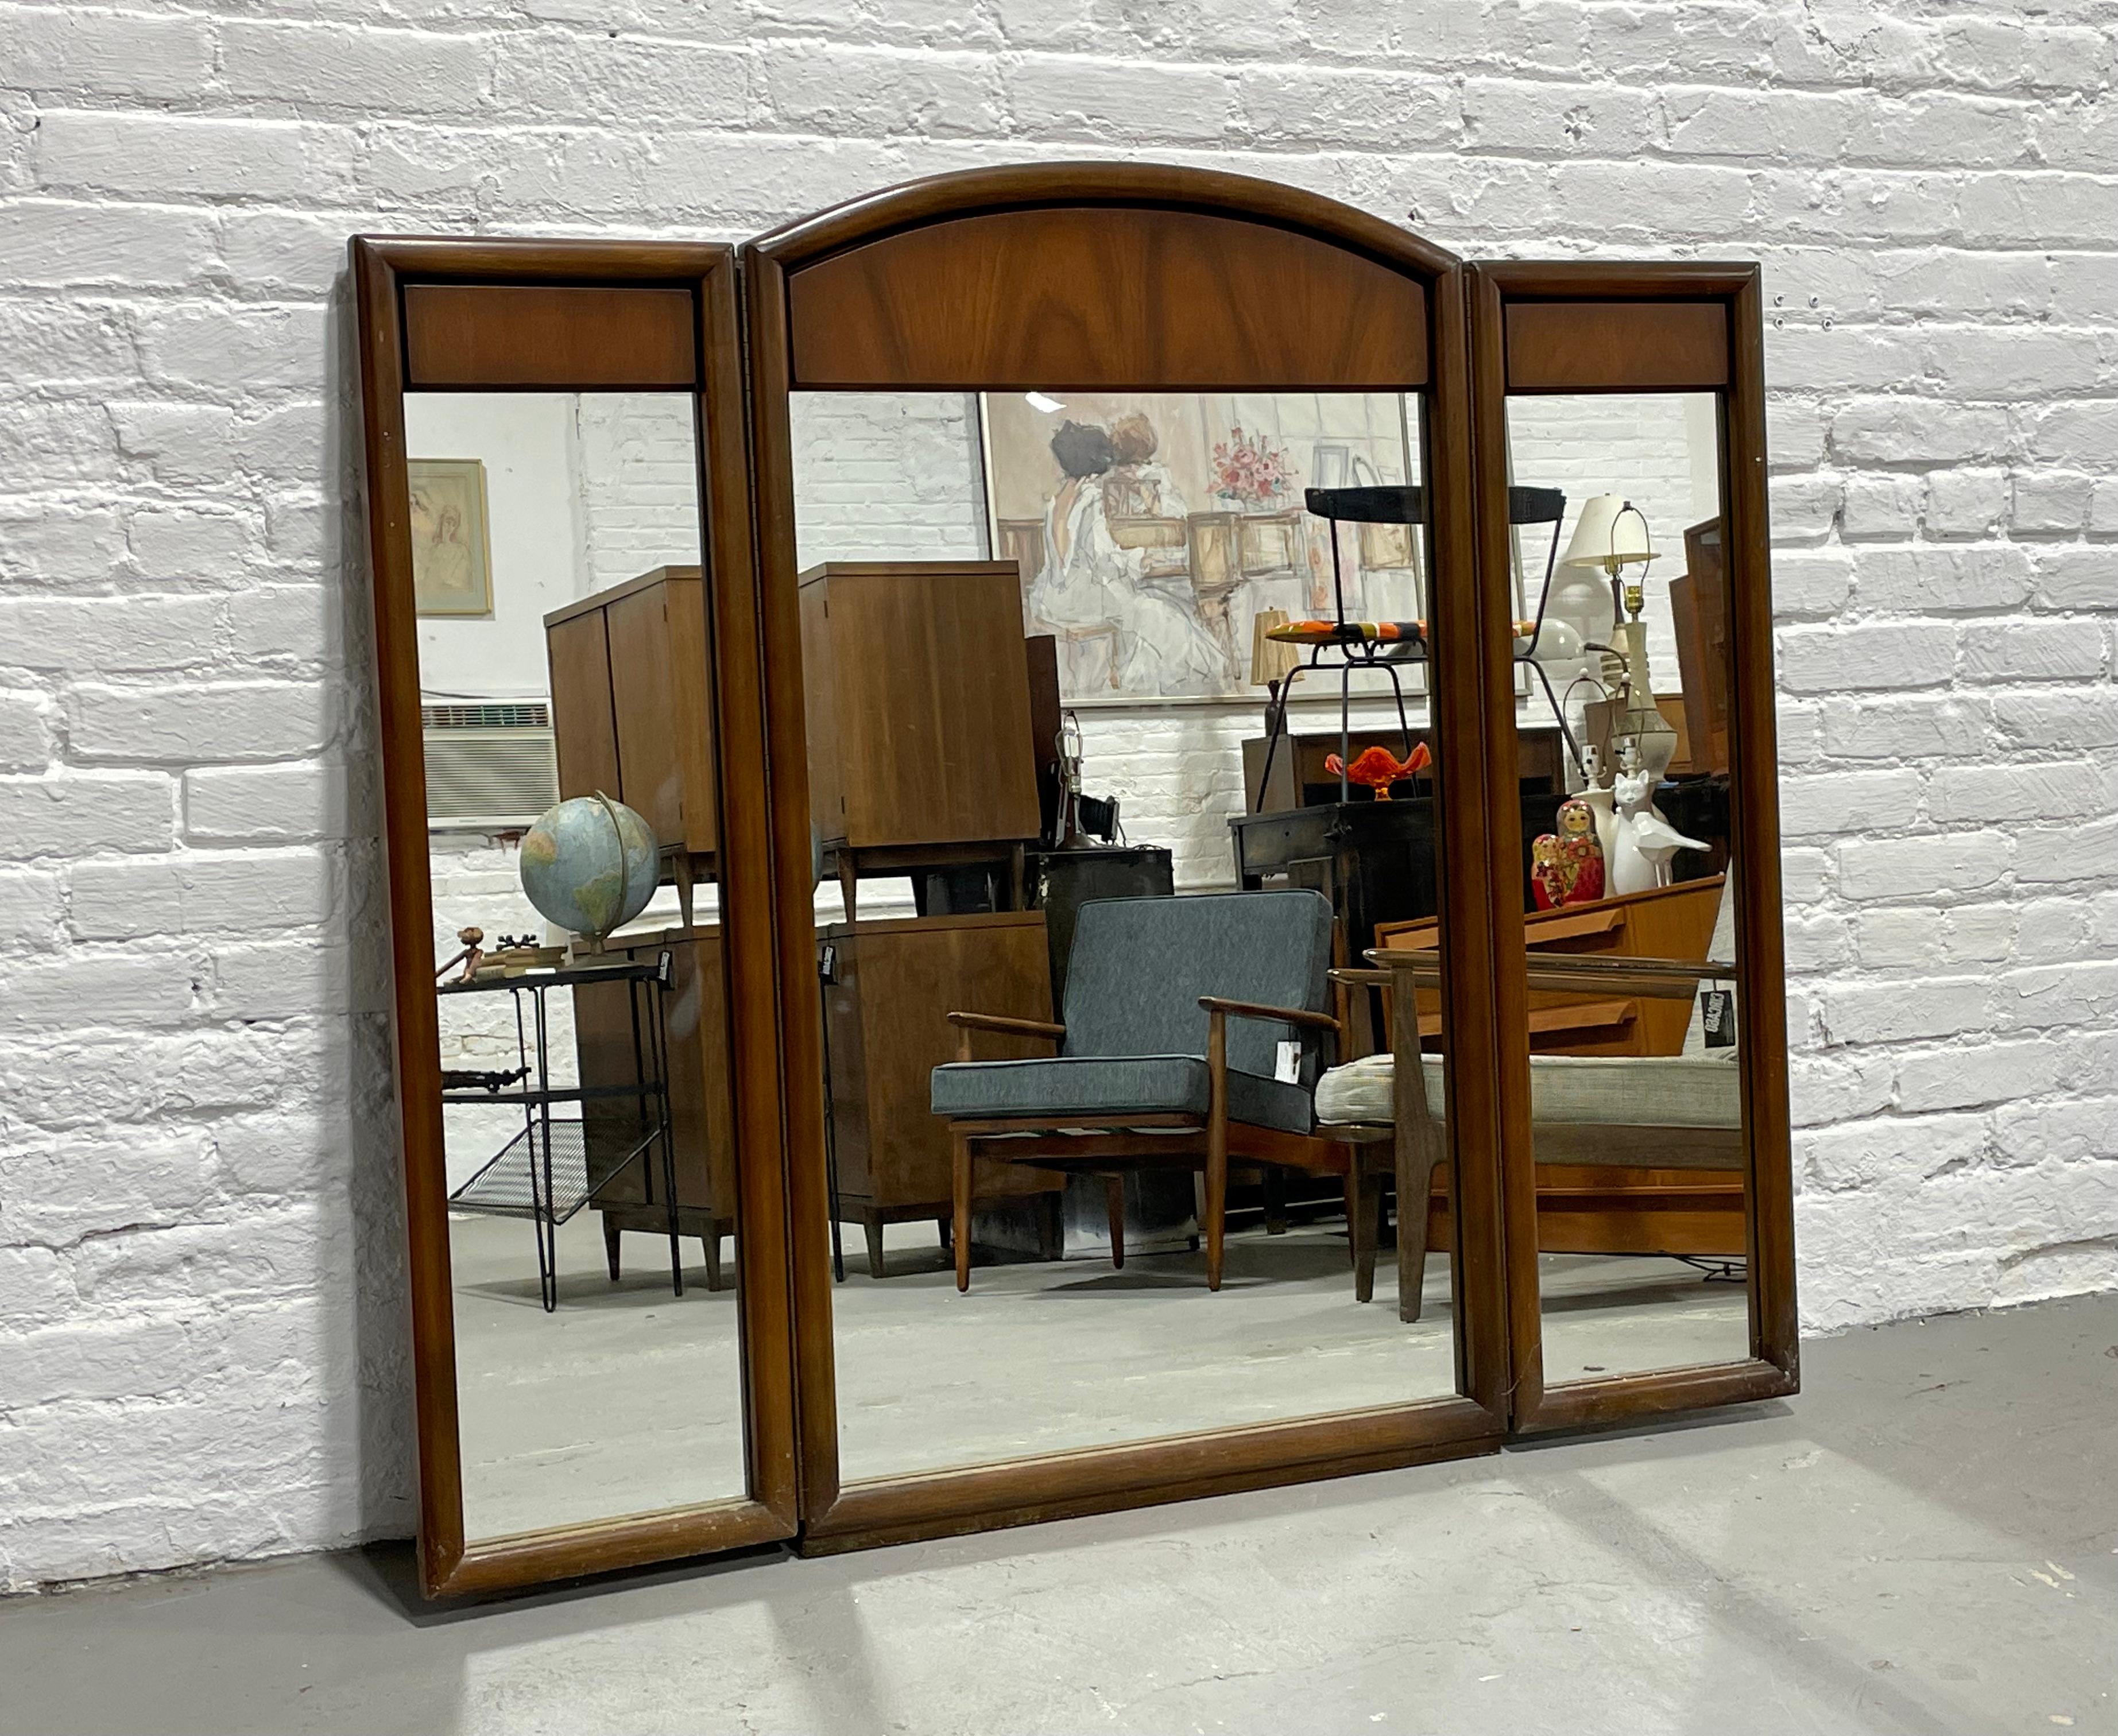 Large Mid-Century Modern walnut three panel mirror, c. 1960s. The glass is crystal clear and the walnut framing is in lovely condition. Each side mirror can be moved and sits on piano hinges. Sturdy and handsome mirror that will add a stunning